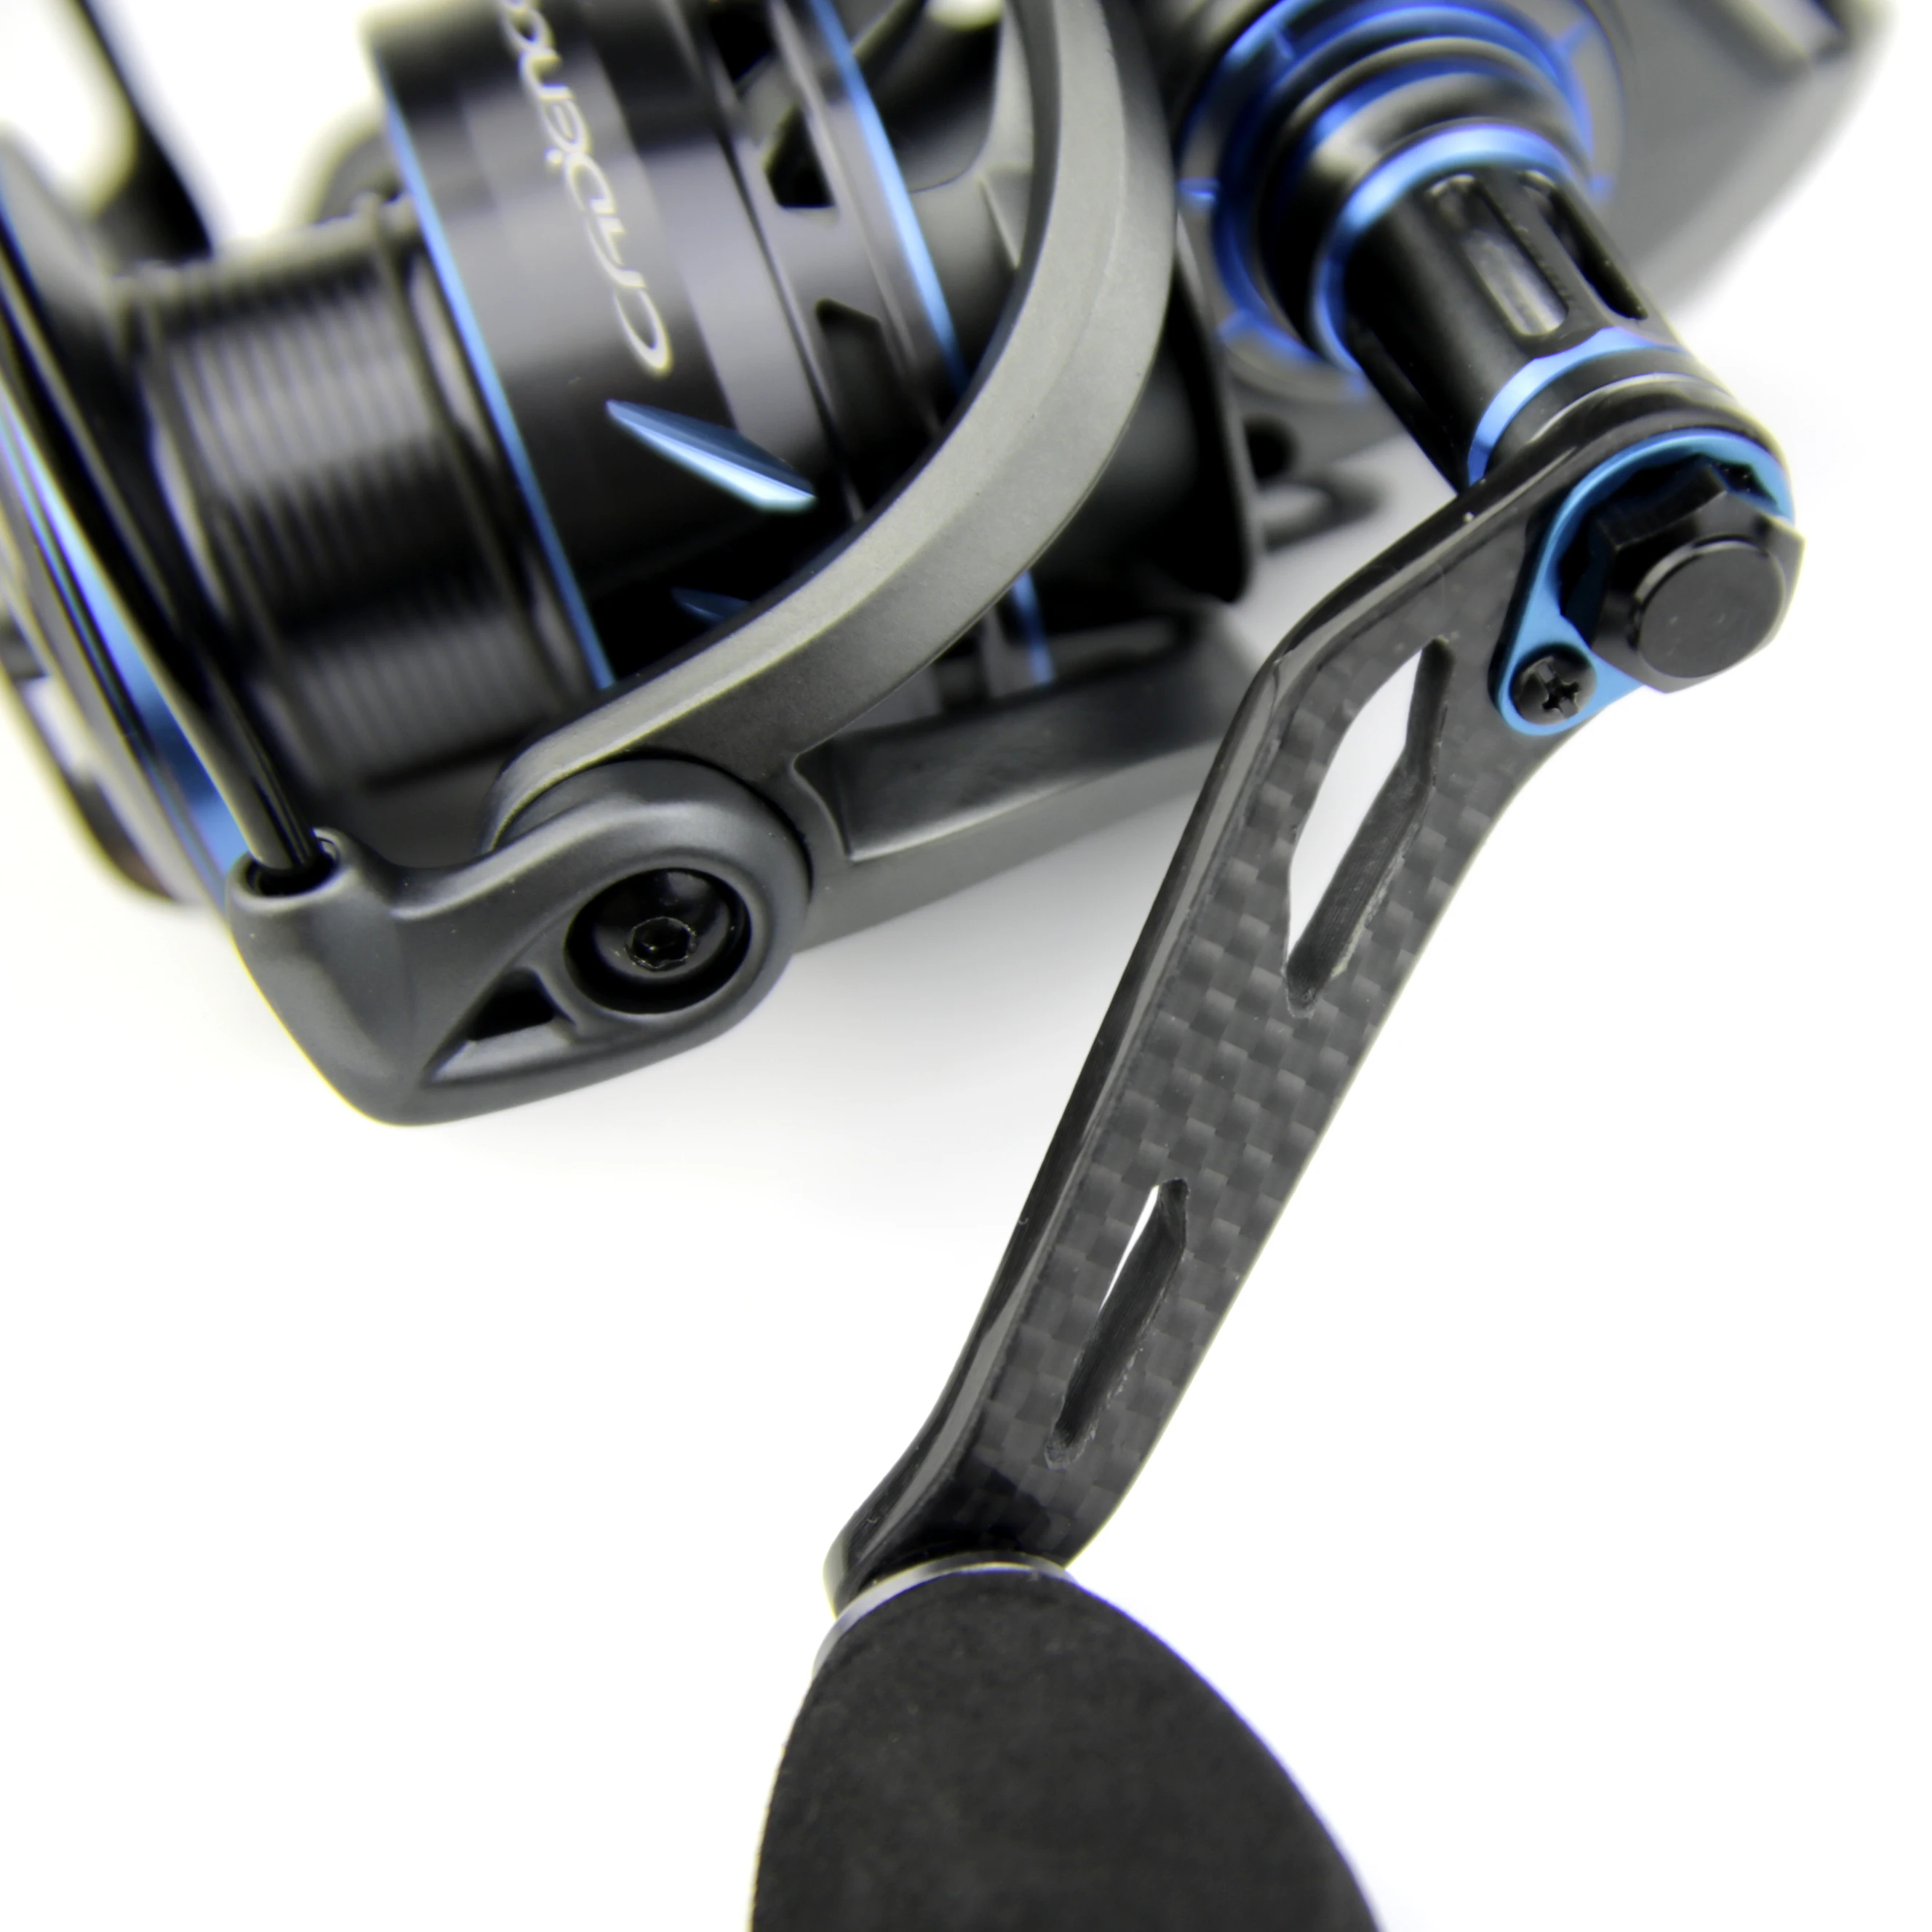 Spinning Reel 10+1BB Ultra Smooth Fishing Reels Fast Speed Carbon